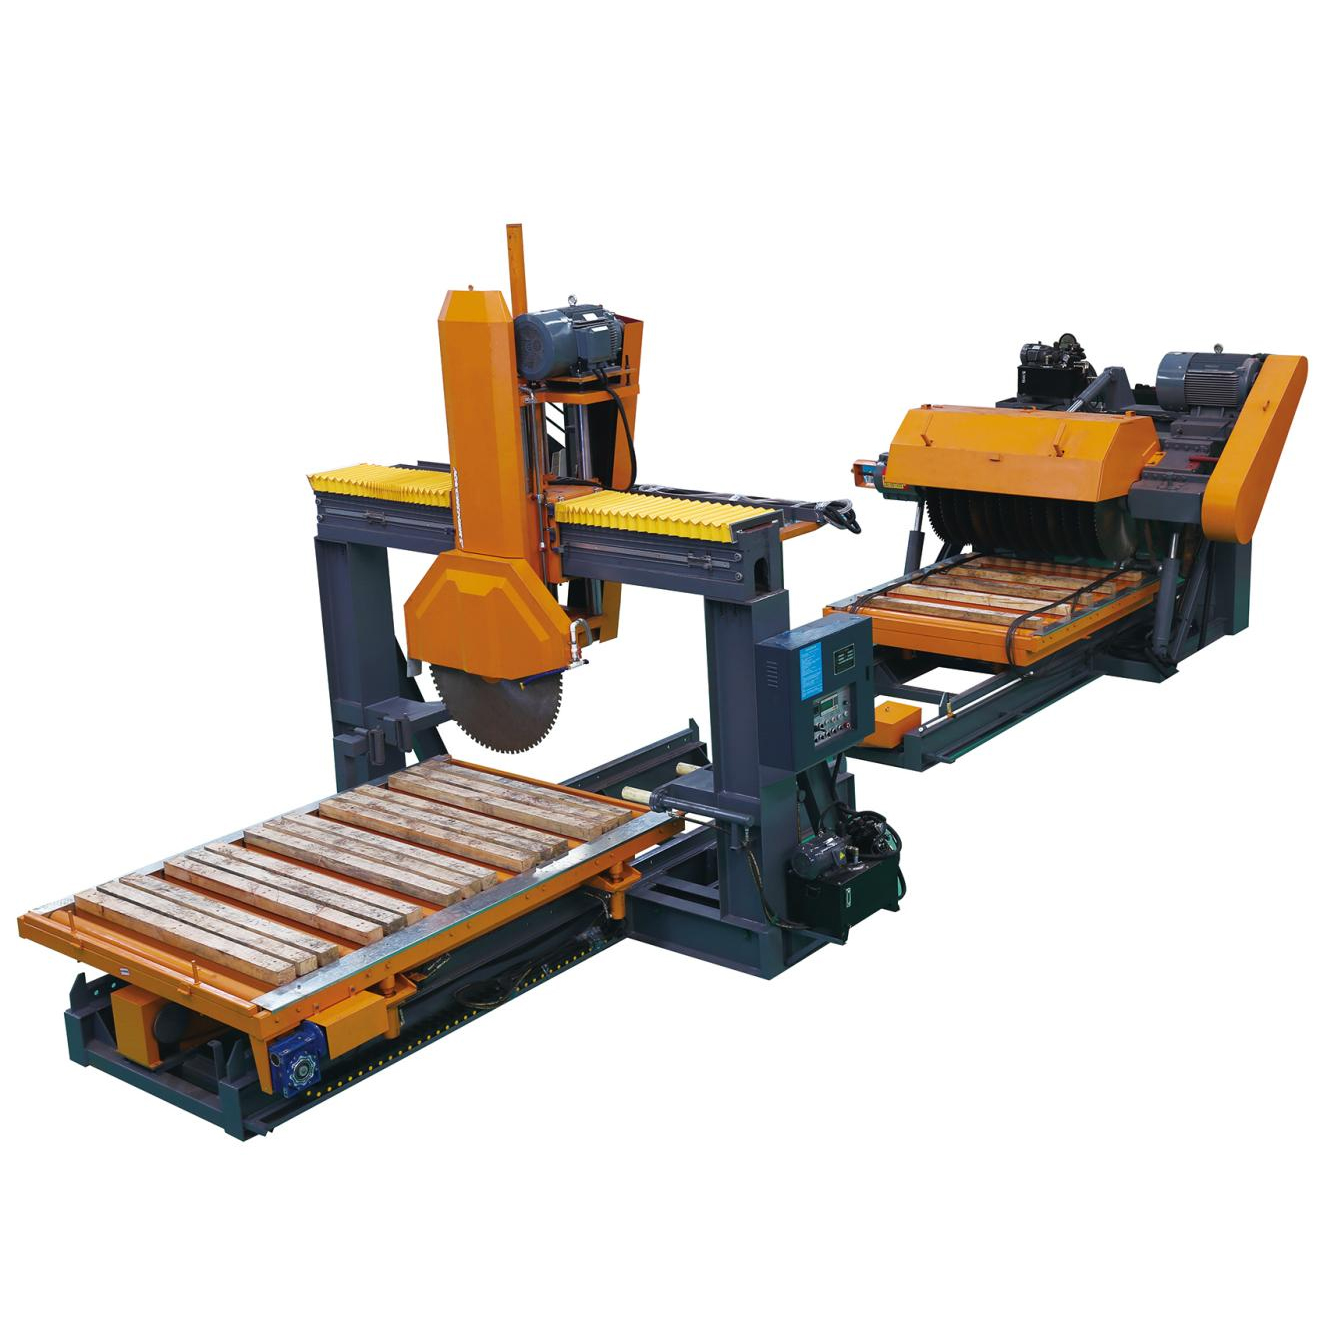 Curbstone Production Line